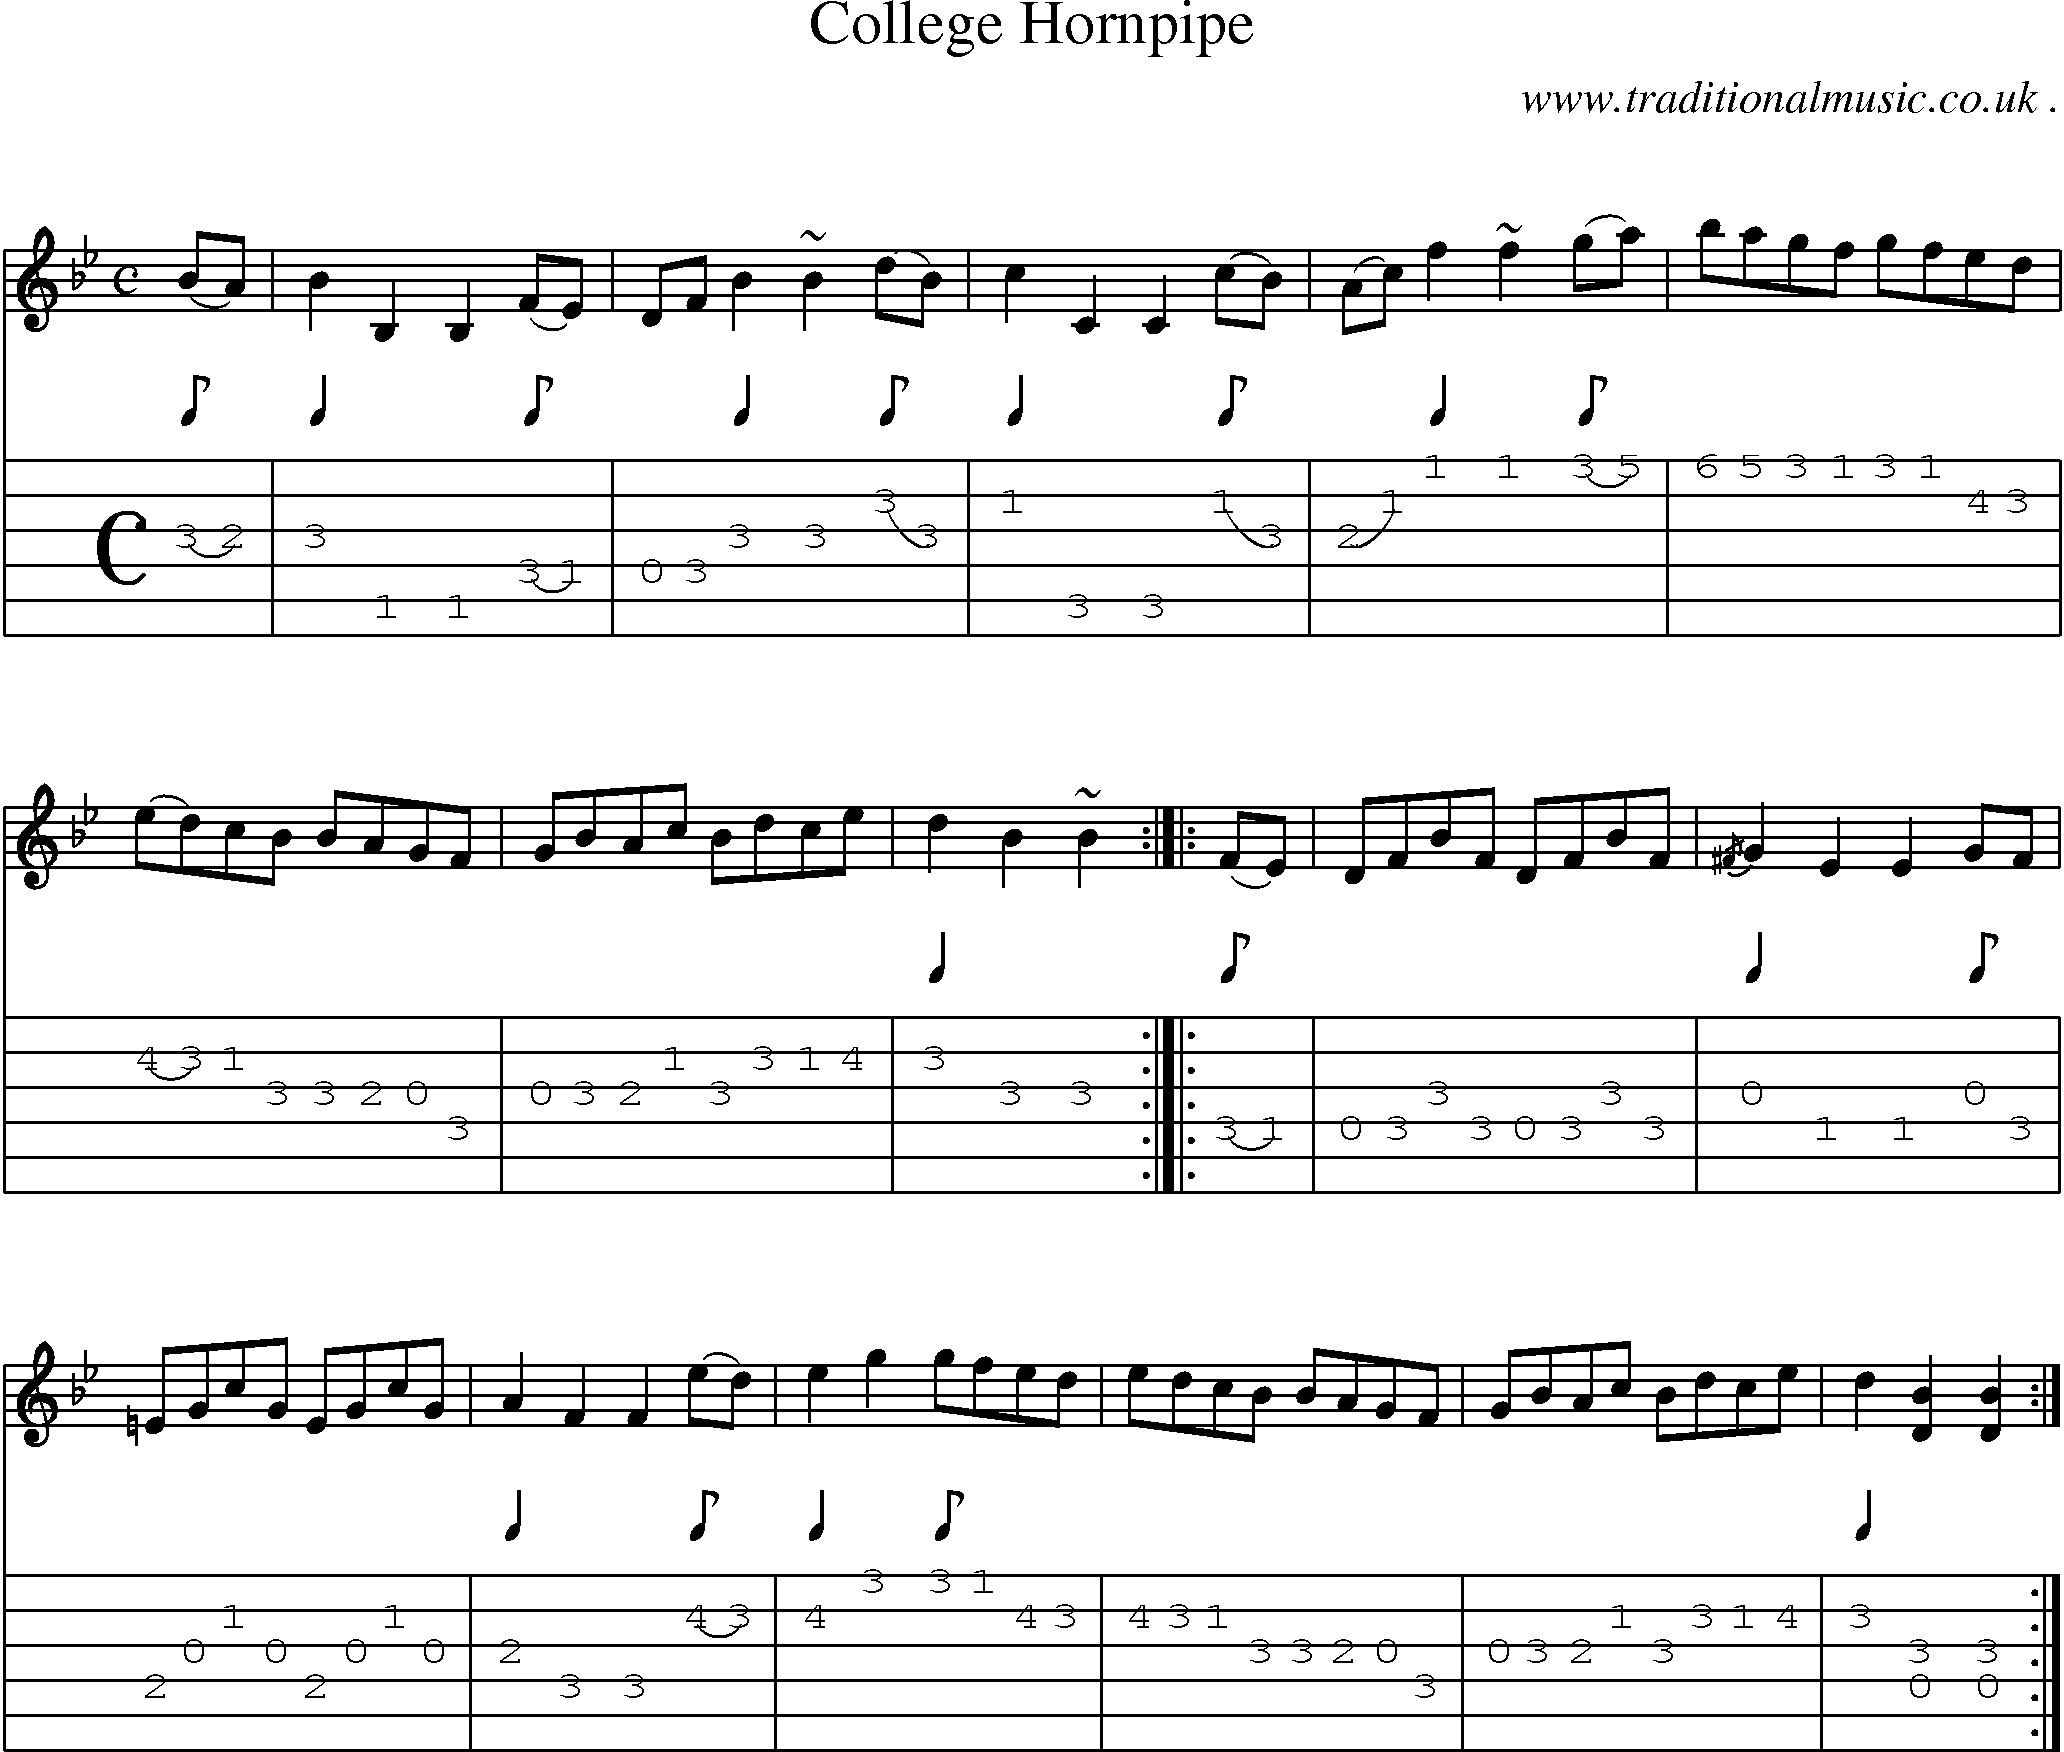 Sheet-music  score, Chords and Guitar Tabs for College Hornpipe